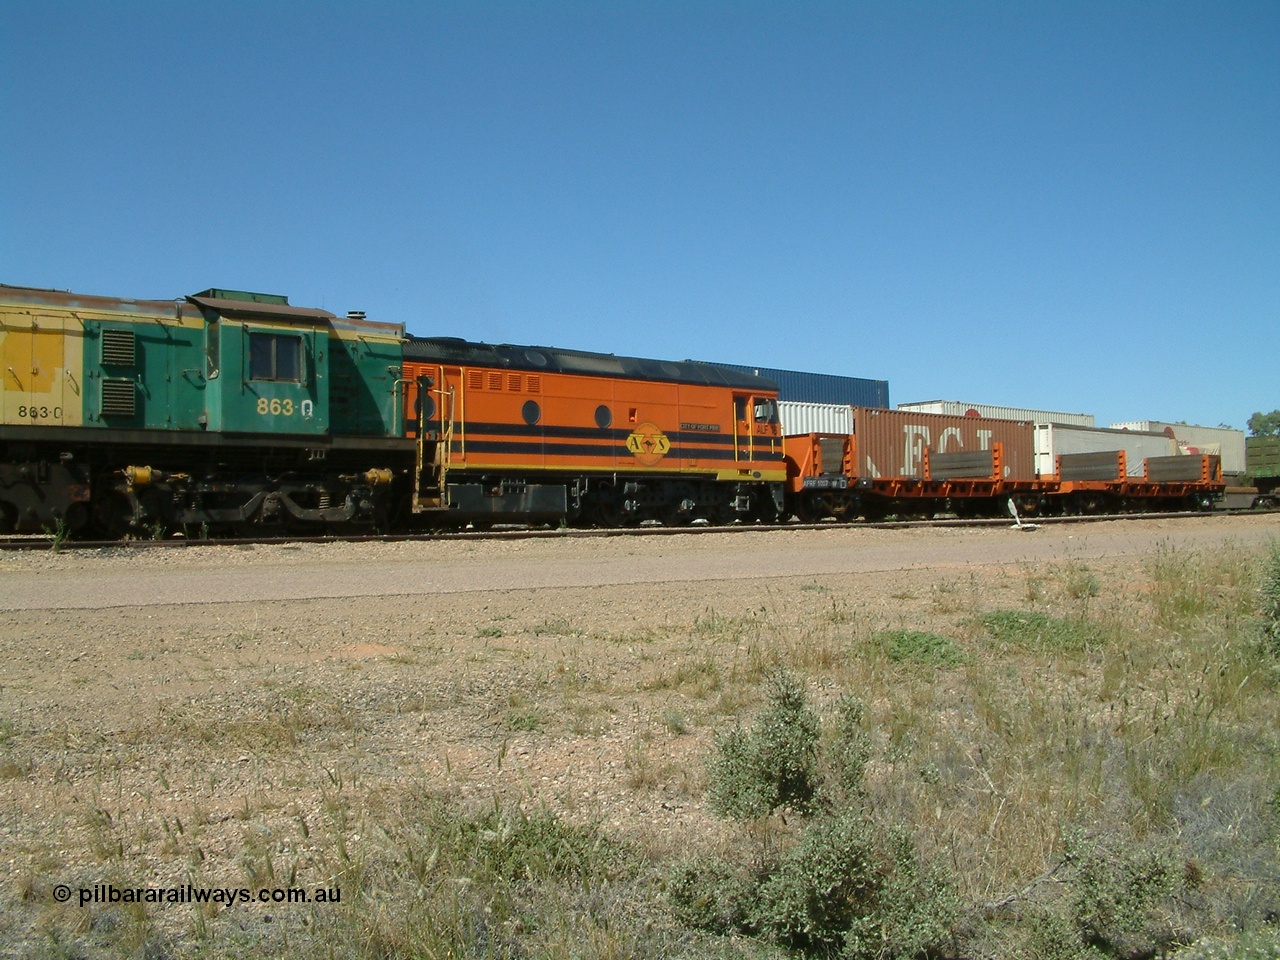 030404 131846
Port Augusta, Spencer Junction shunt loco 830 class unit 863 serial 84709 is an AE Goodwin built ALCo DL531 model and entered service in June 1963. 4th April 2003.
Keywords: 830-class;863;84709;AE-Goodwin;ALCo;DL531;